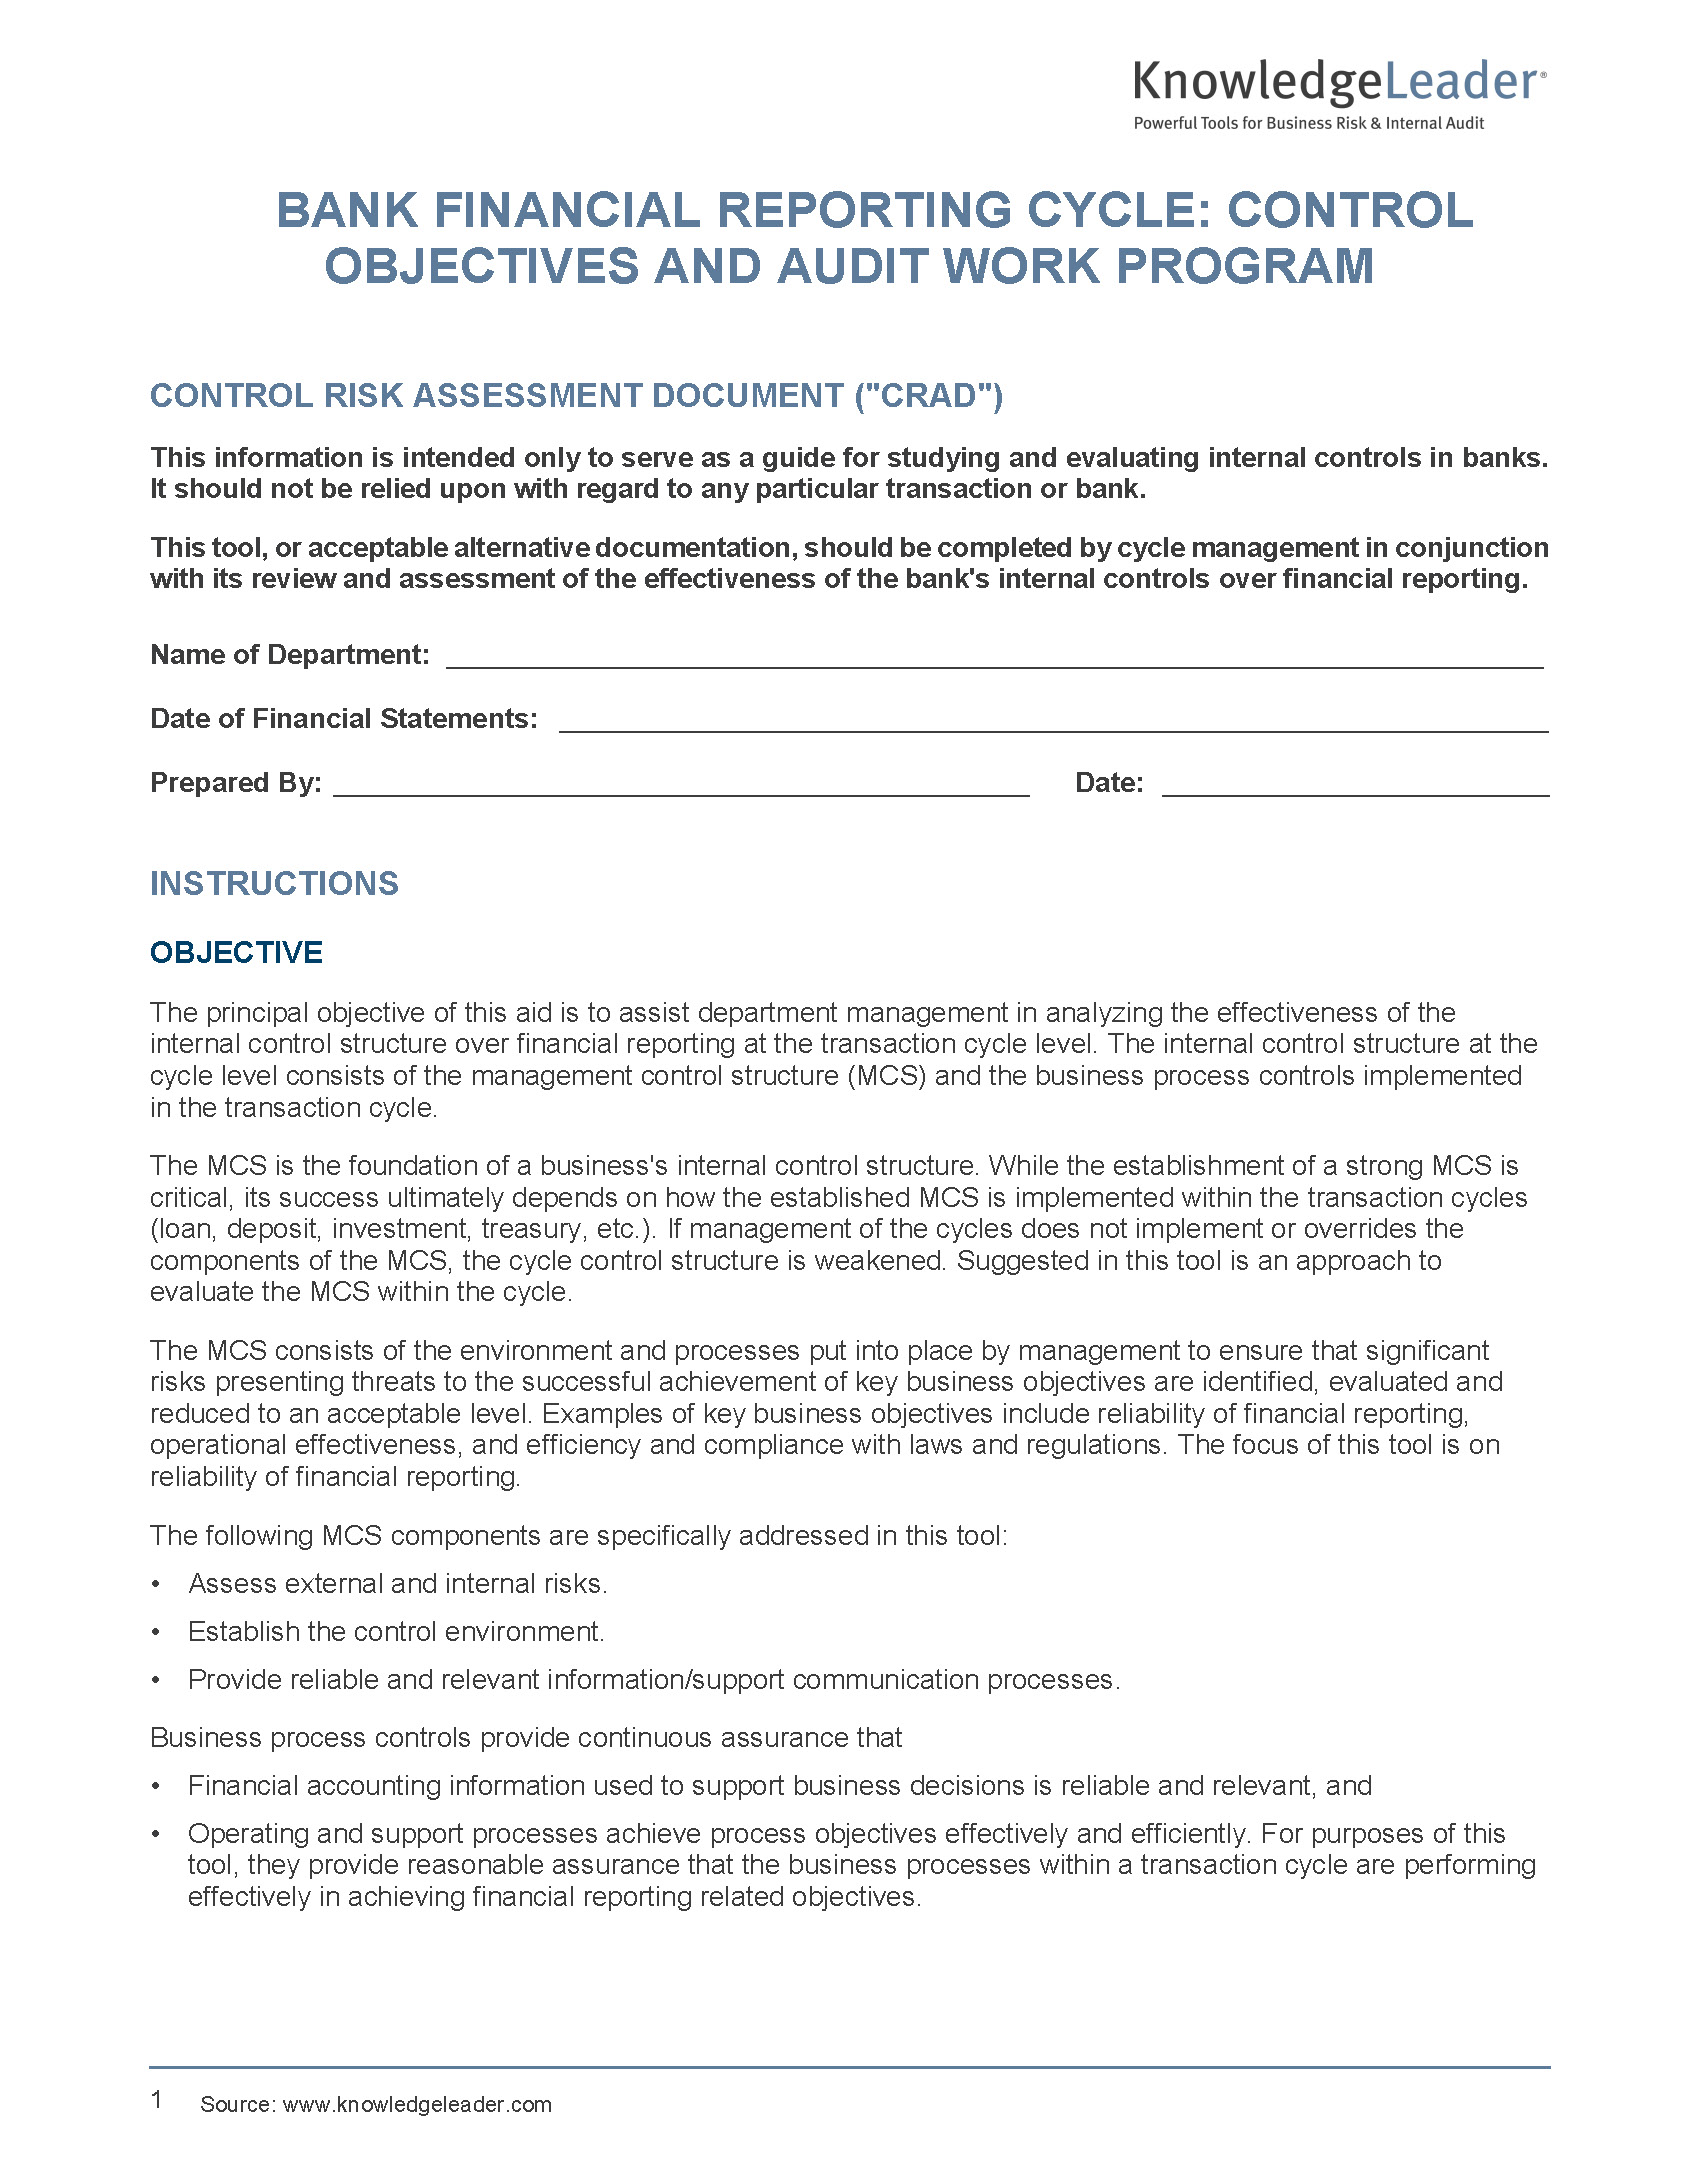 Screenshot of the first page of Bank Financial Reporting Cycle Control Objectives and Audit Work Program